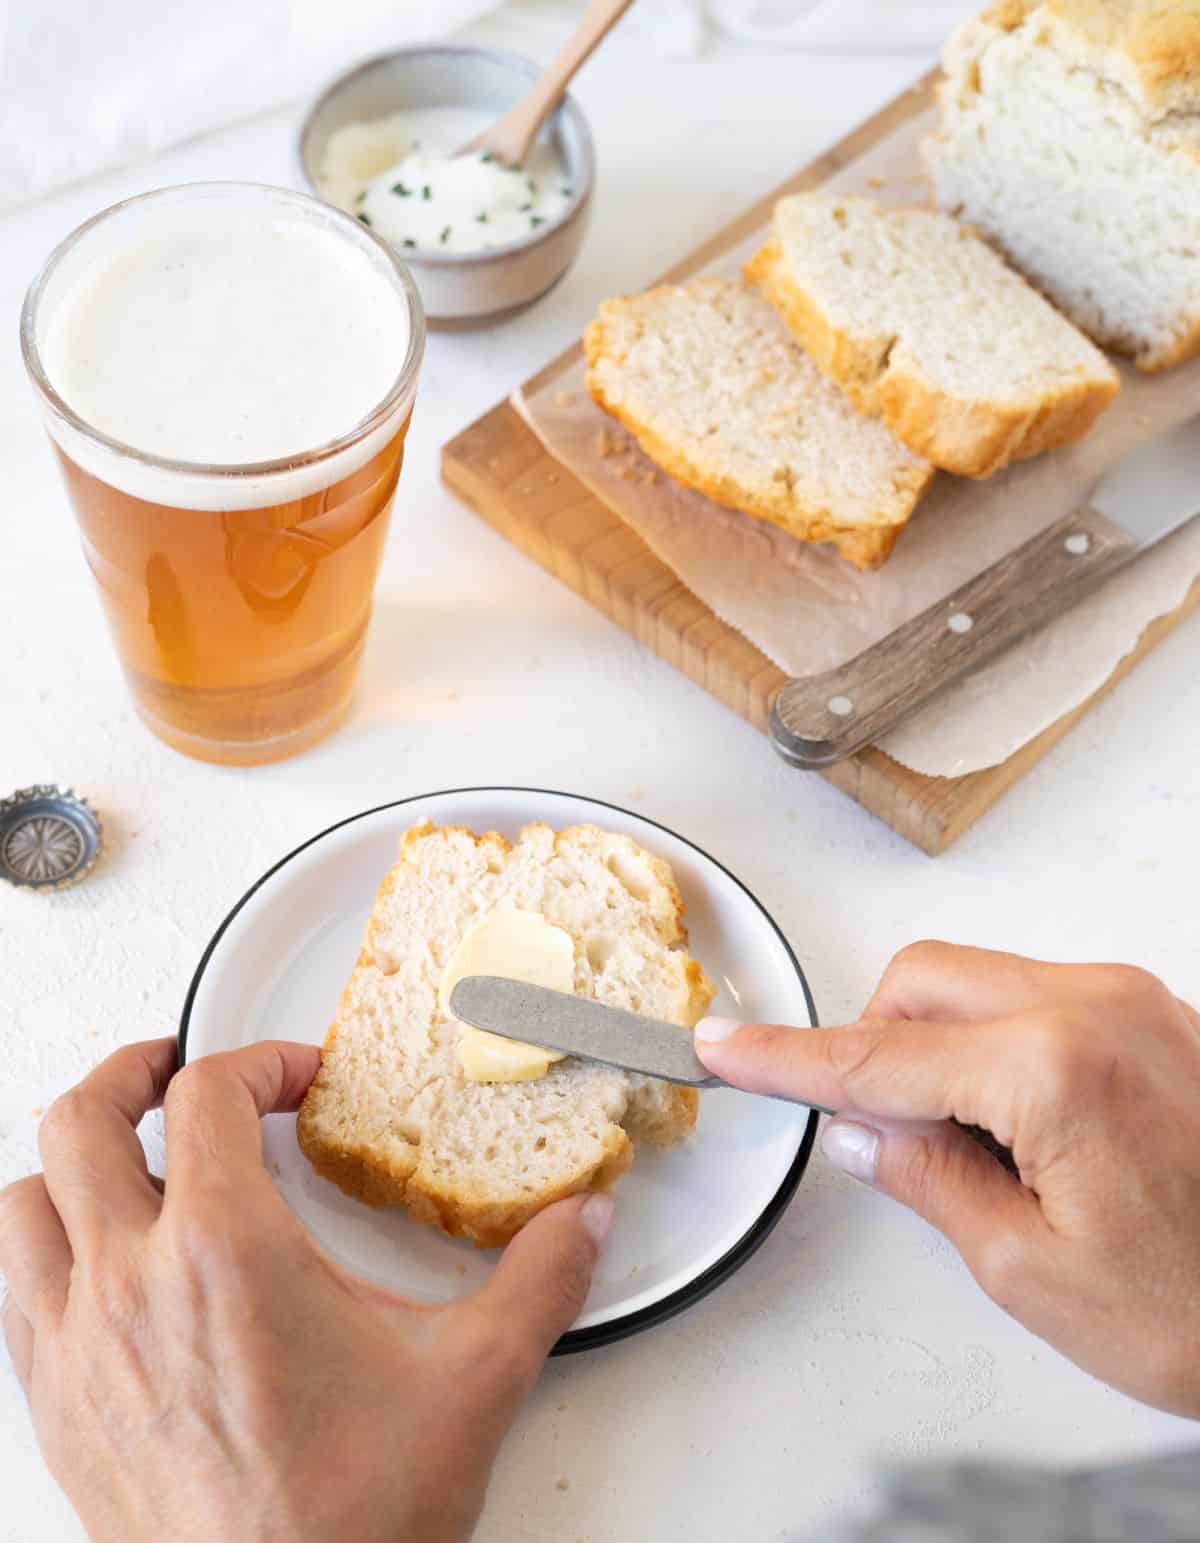 Buttering a slice of beer bread on a white plate. A beer glass, wooden board with loaf of bread, white surface. 